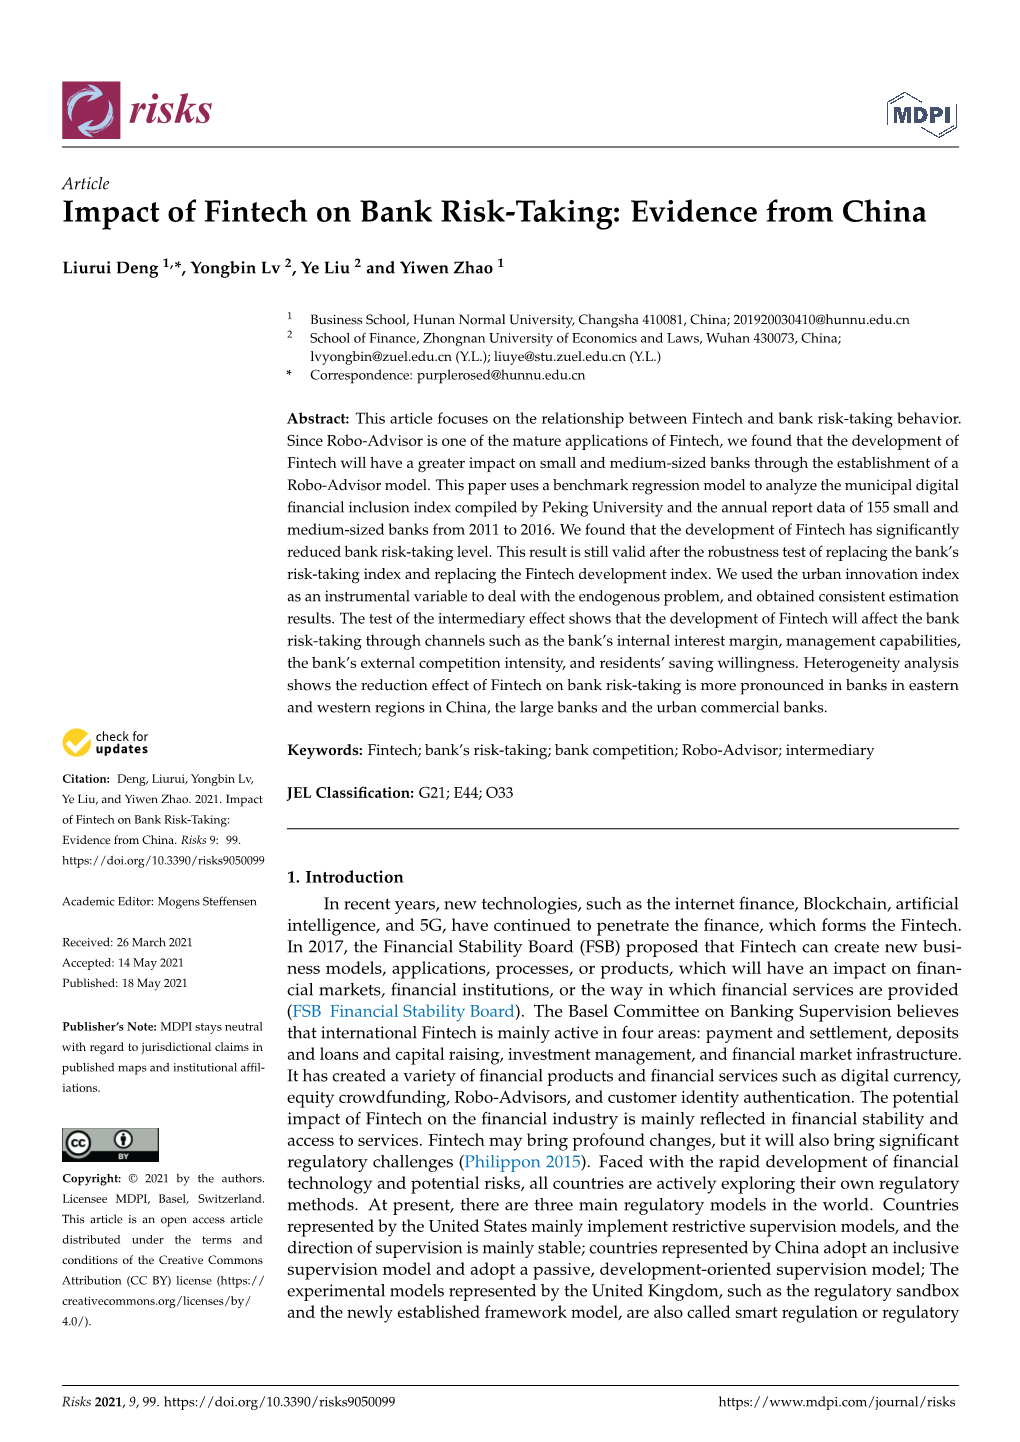 Impact of Fintech on Bank Risk-Taking: Evidence from China